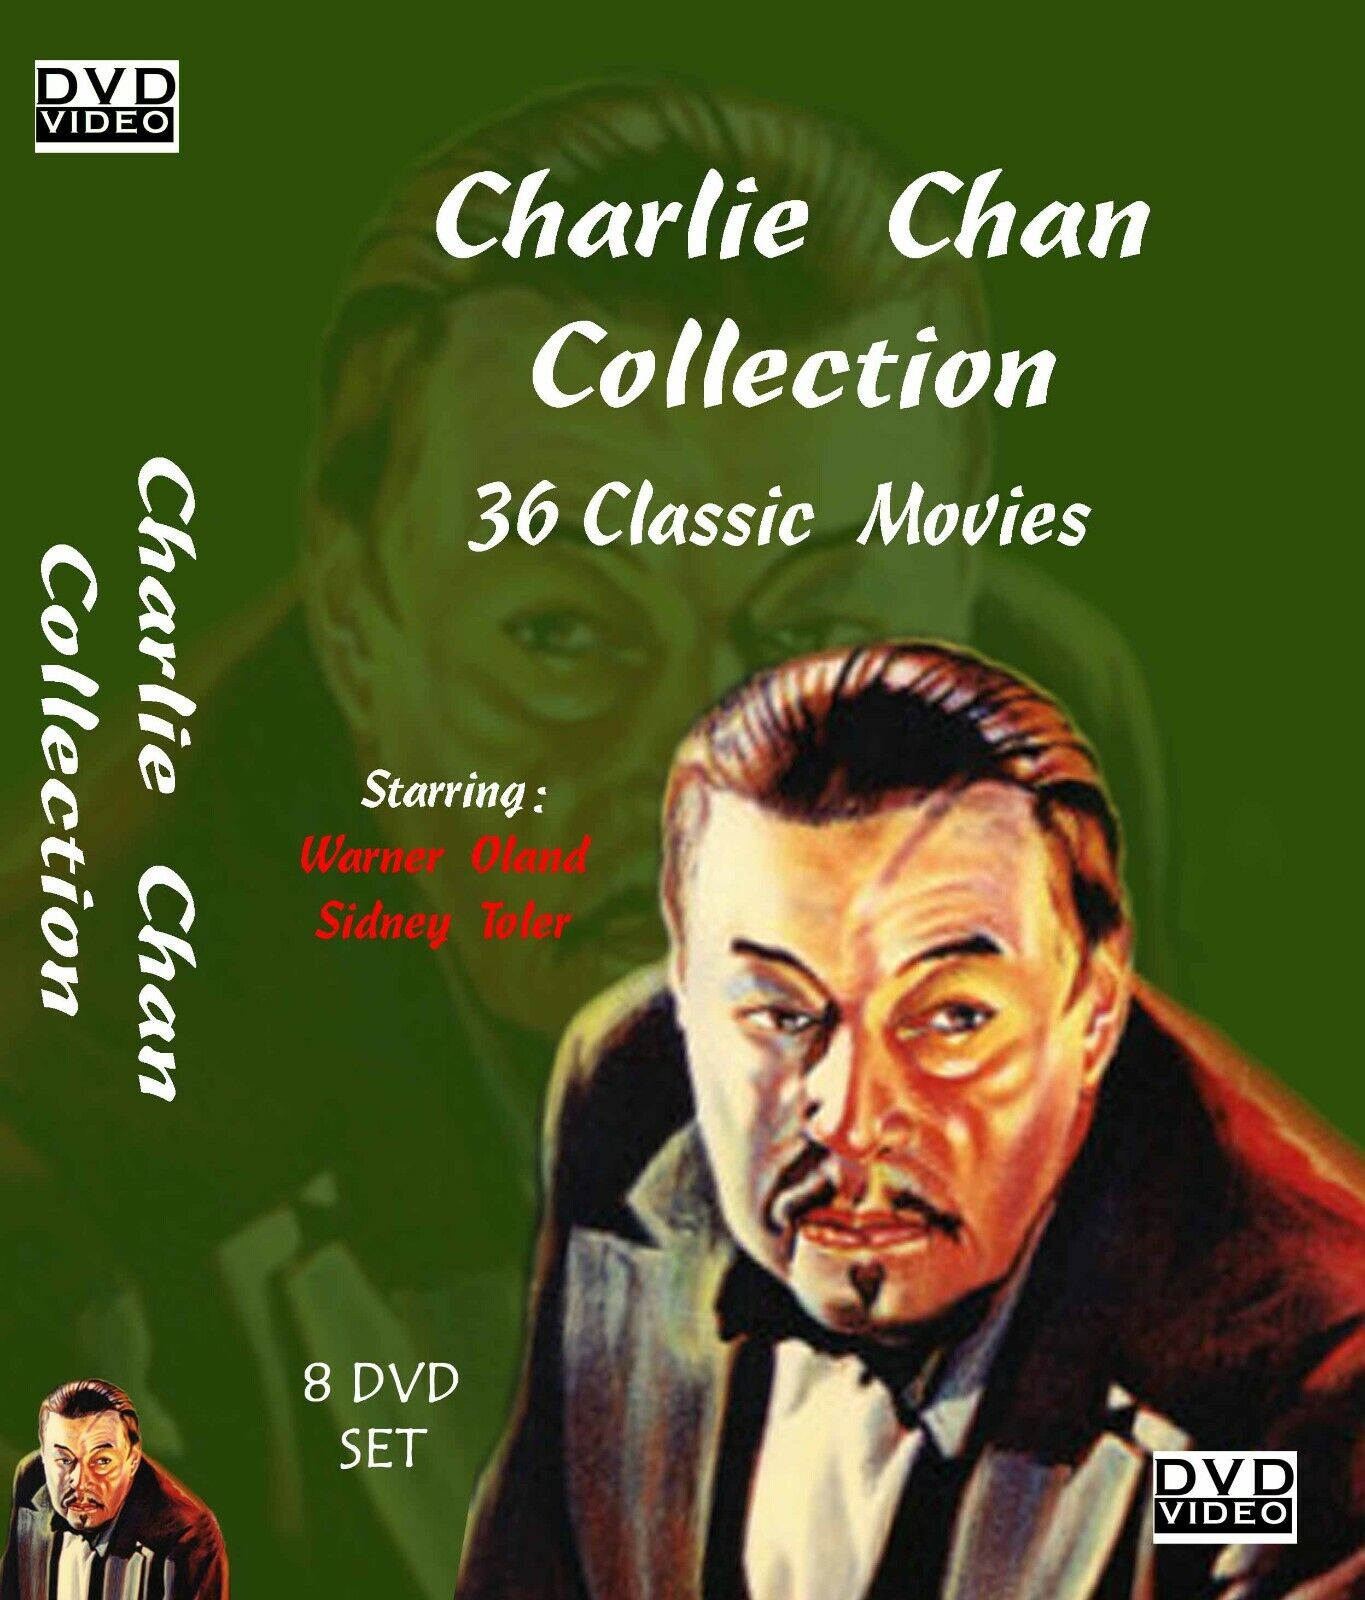 Charlie Chan Collection 36 Classic Movies on 8 DVDs